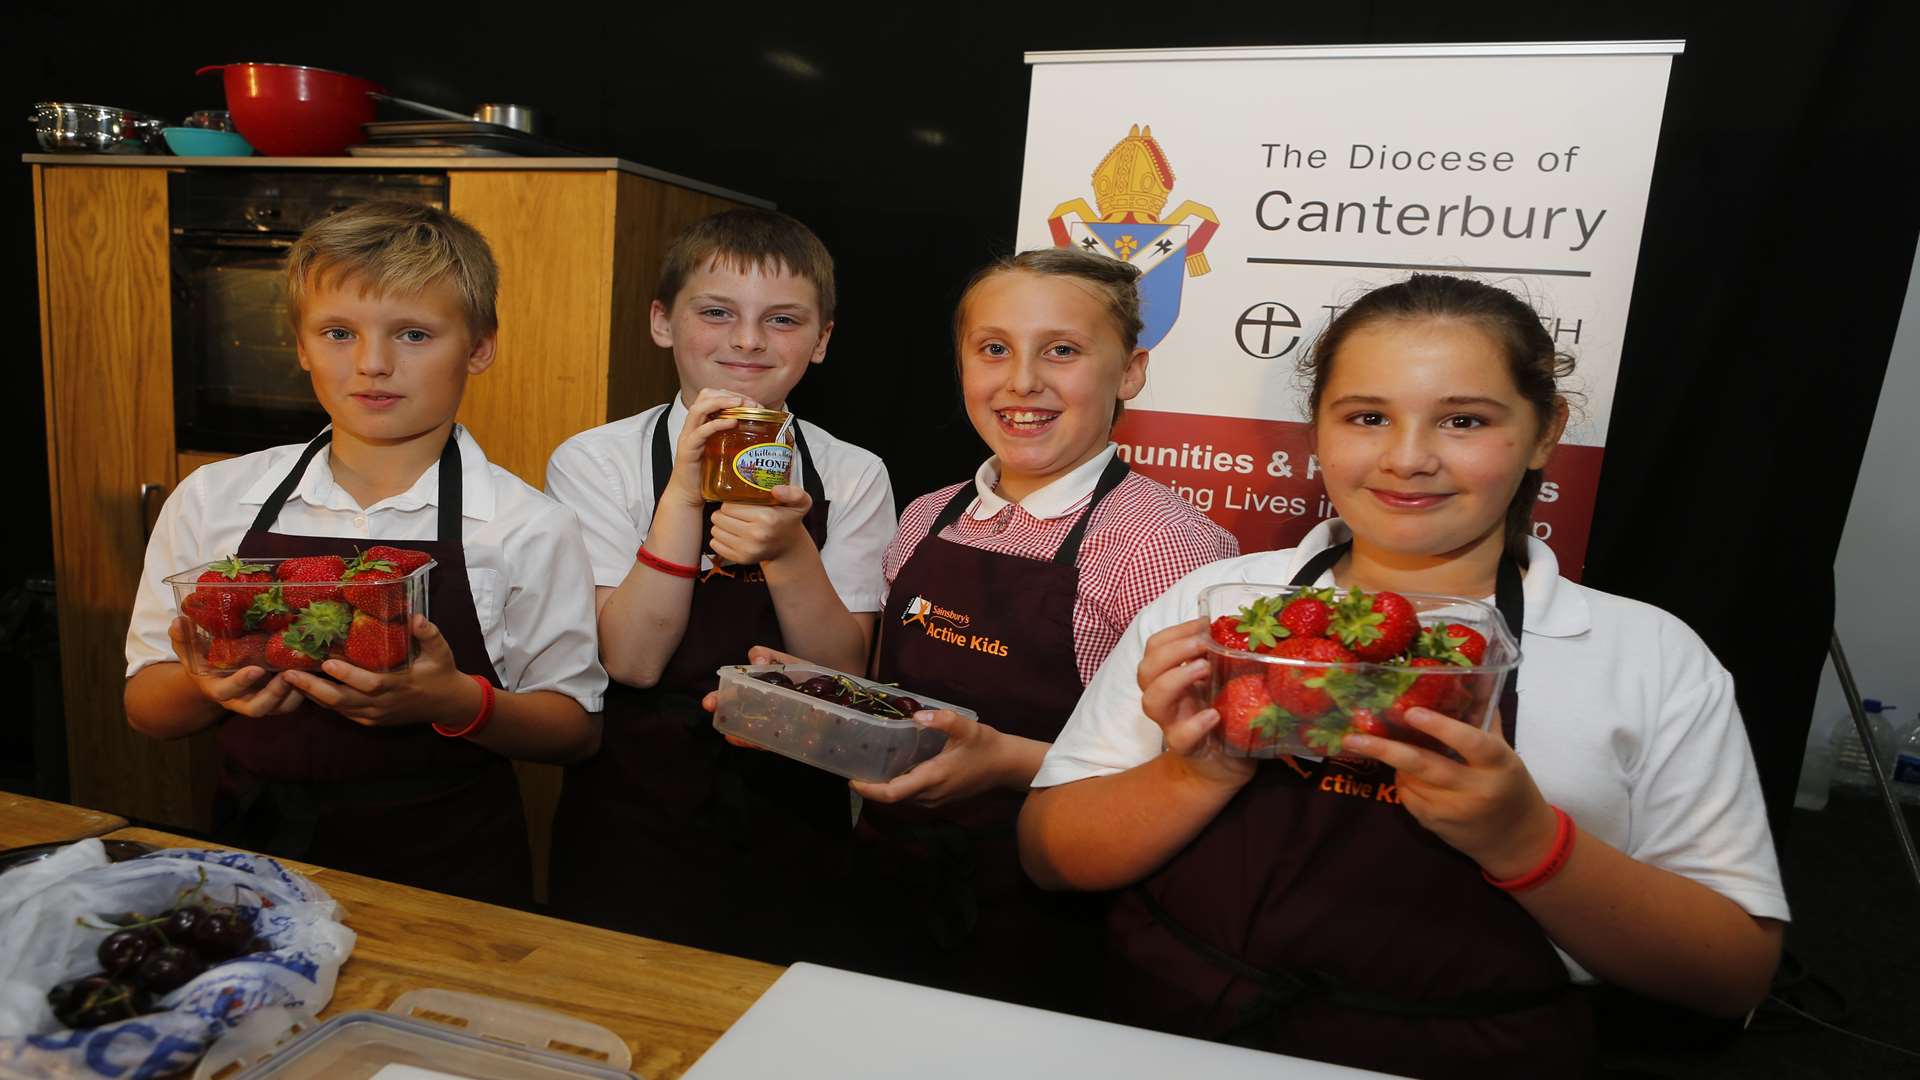 Diocese of Canterbury Kent is Delicious cooking competiton for schools. From LEft: Pictured are David, Oliver, Chloe & Jessica from Year 5 at Teynham school